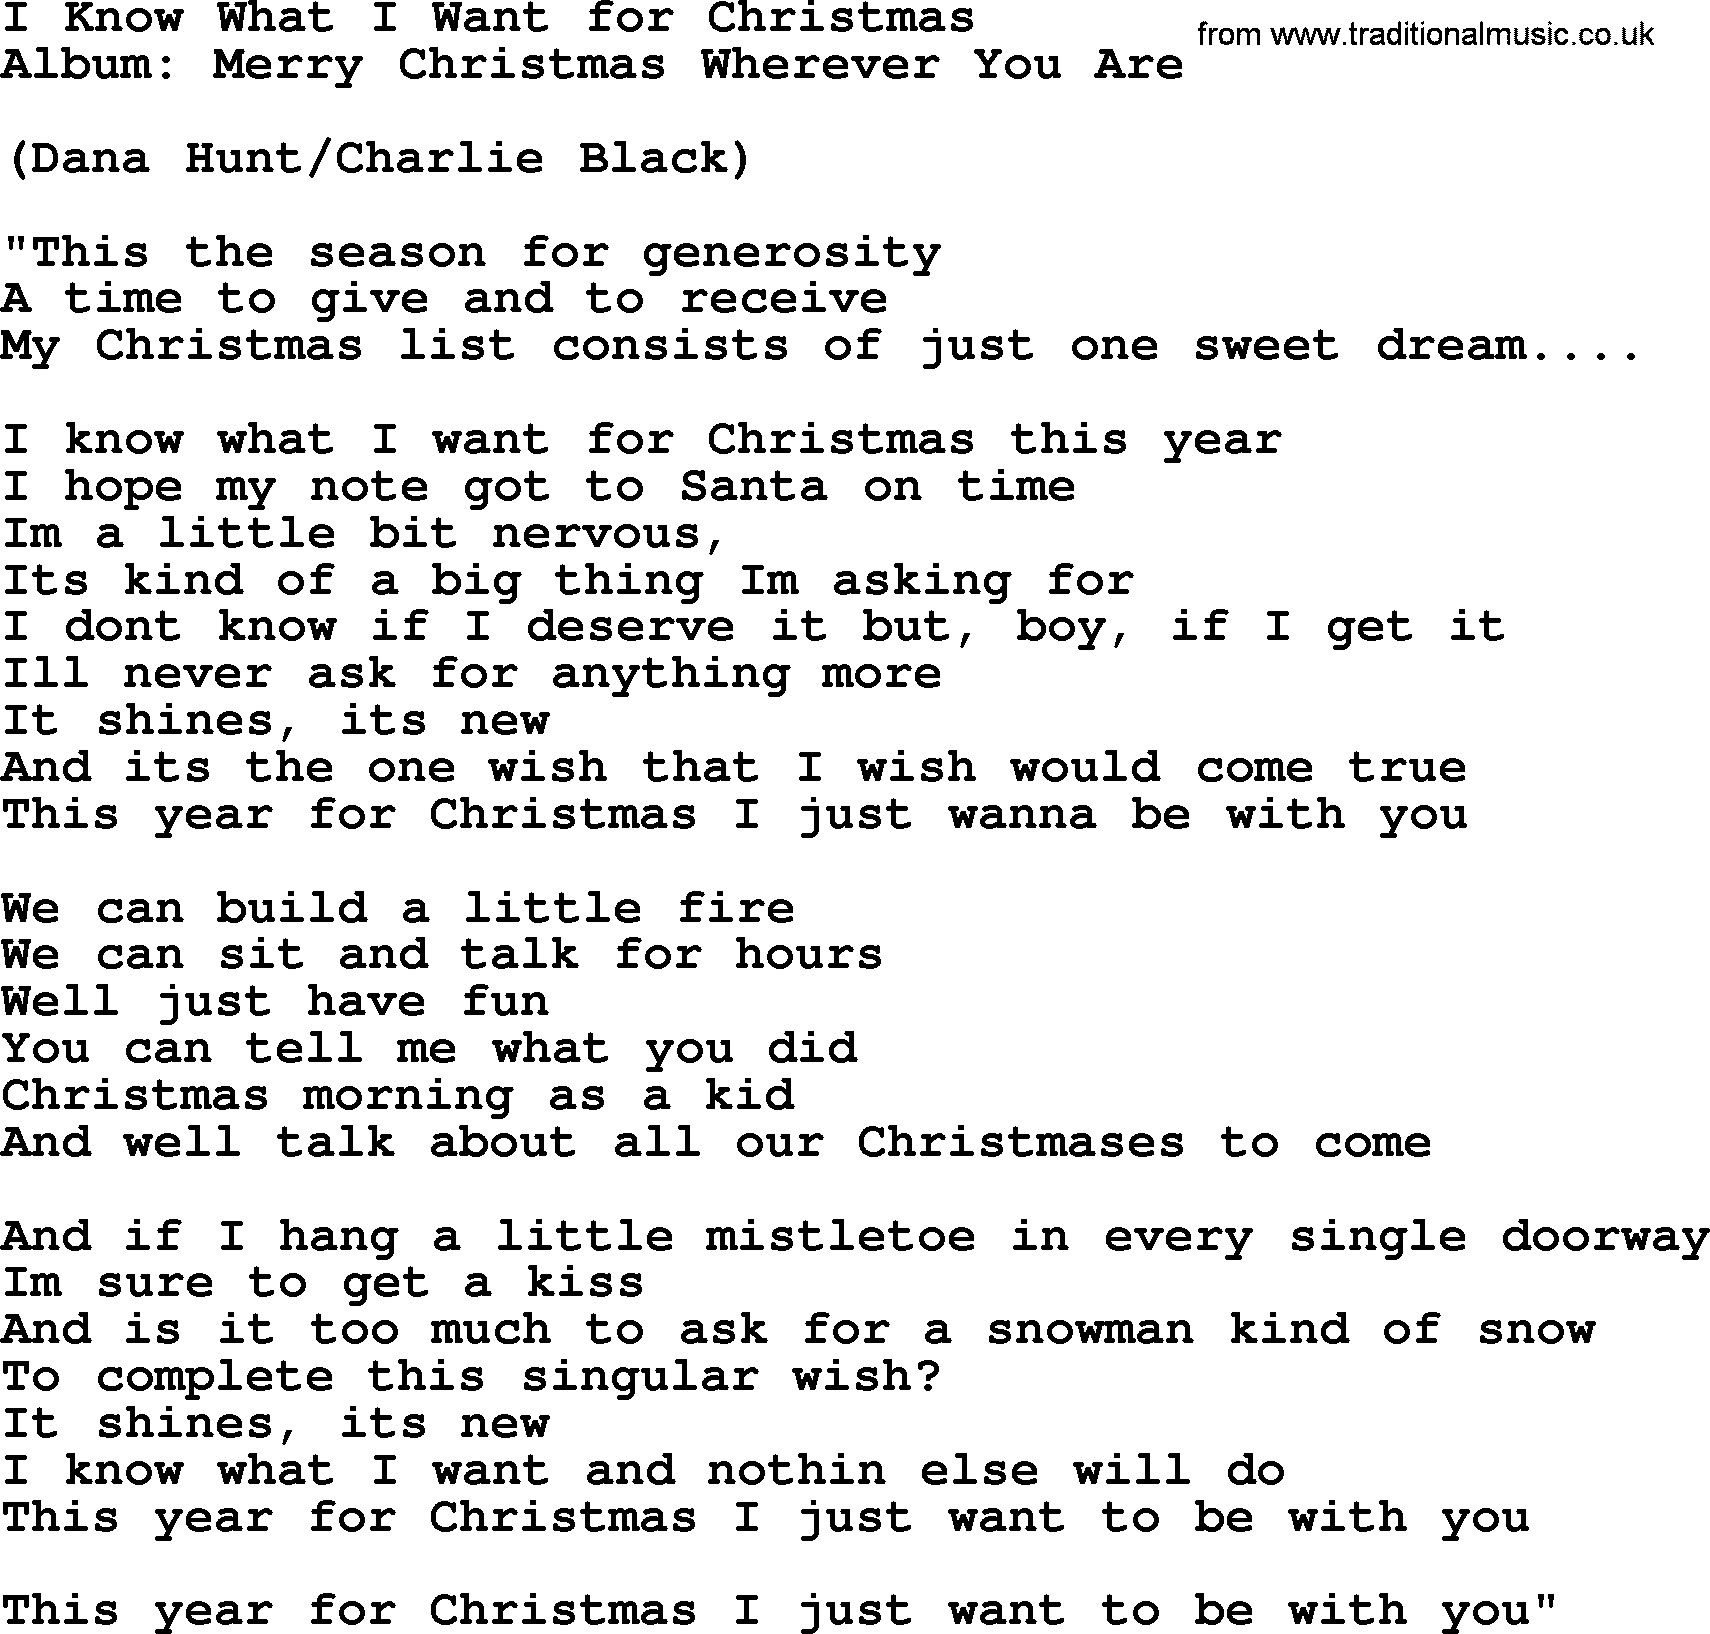 George Strait song: I Know What I Want for Christmas, lyrics